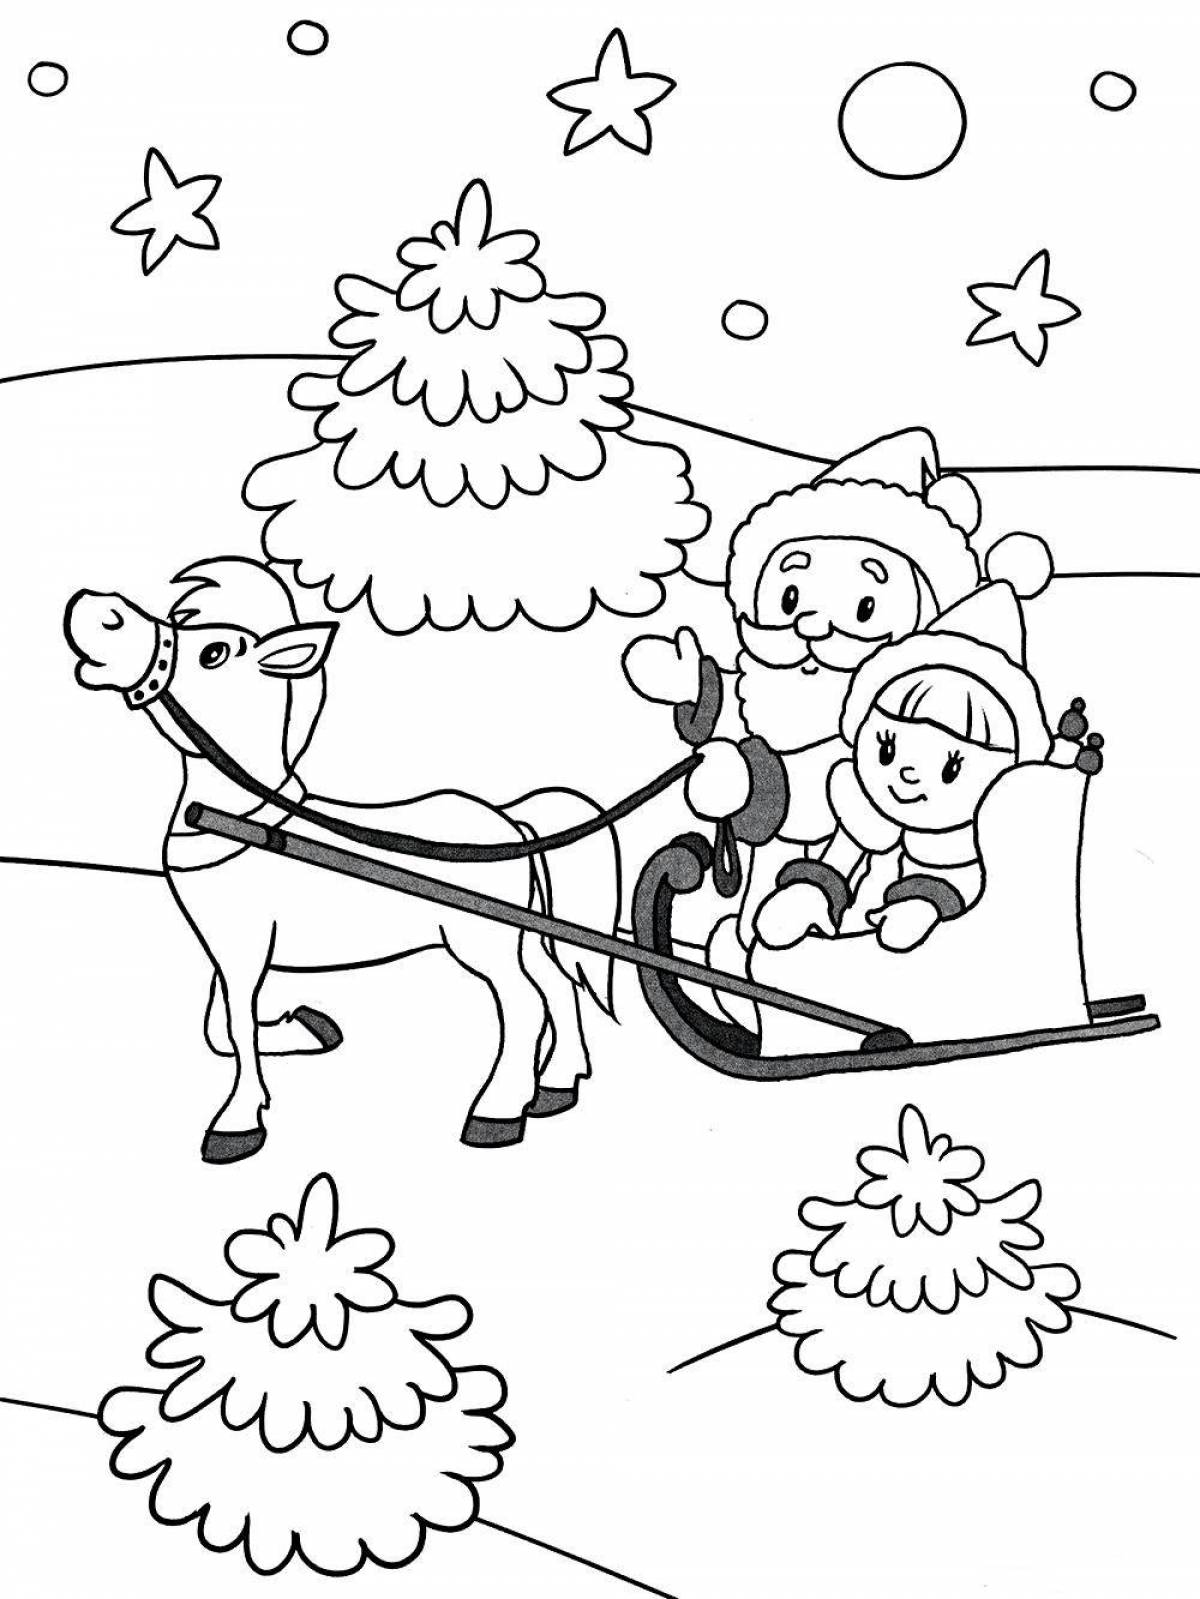 Playful coloring book for children winter fun 5-6 years old